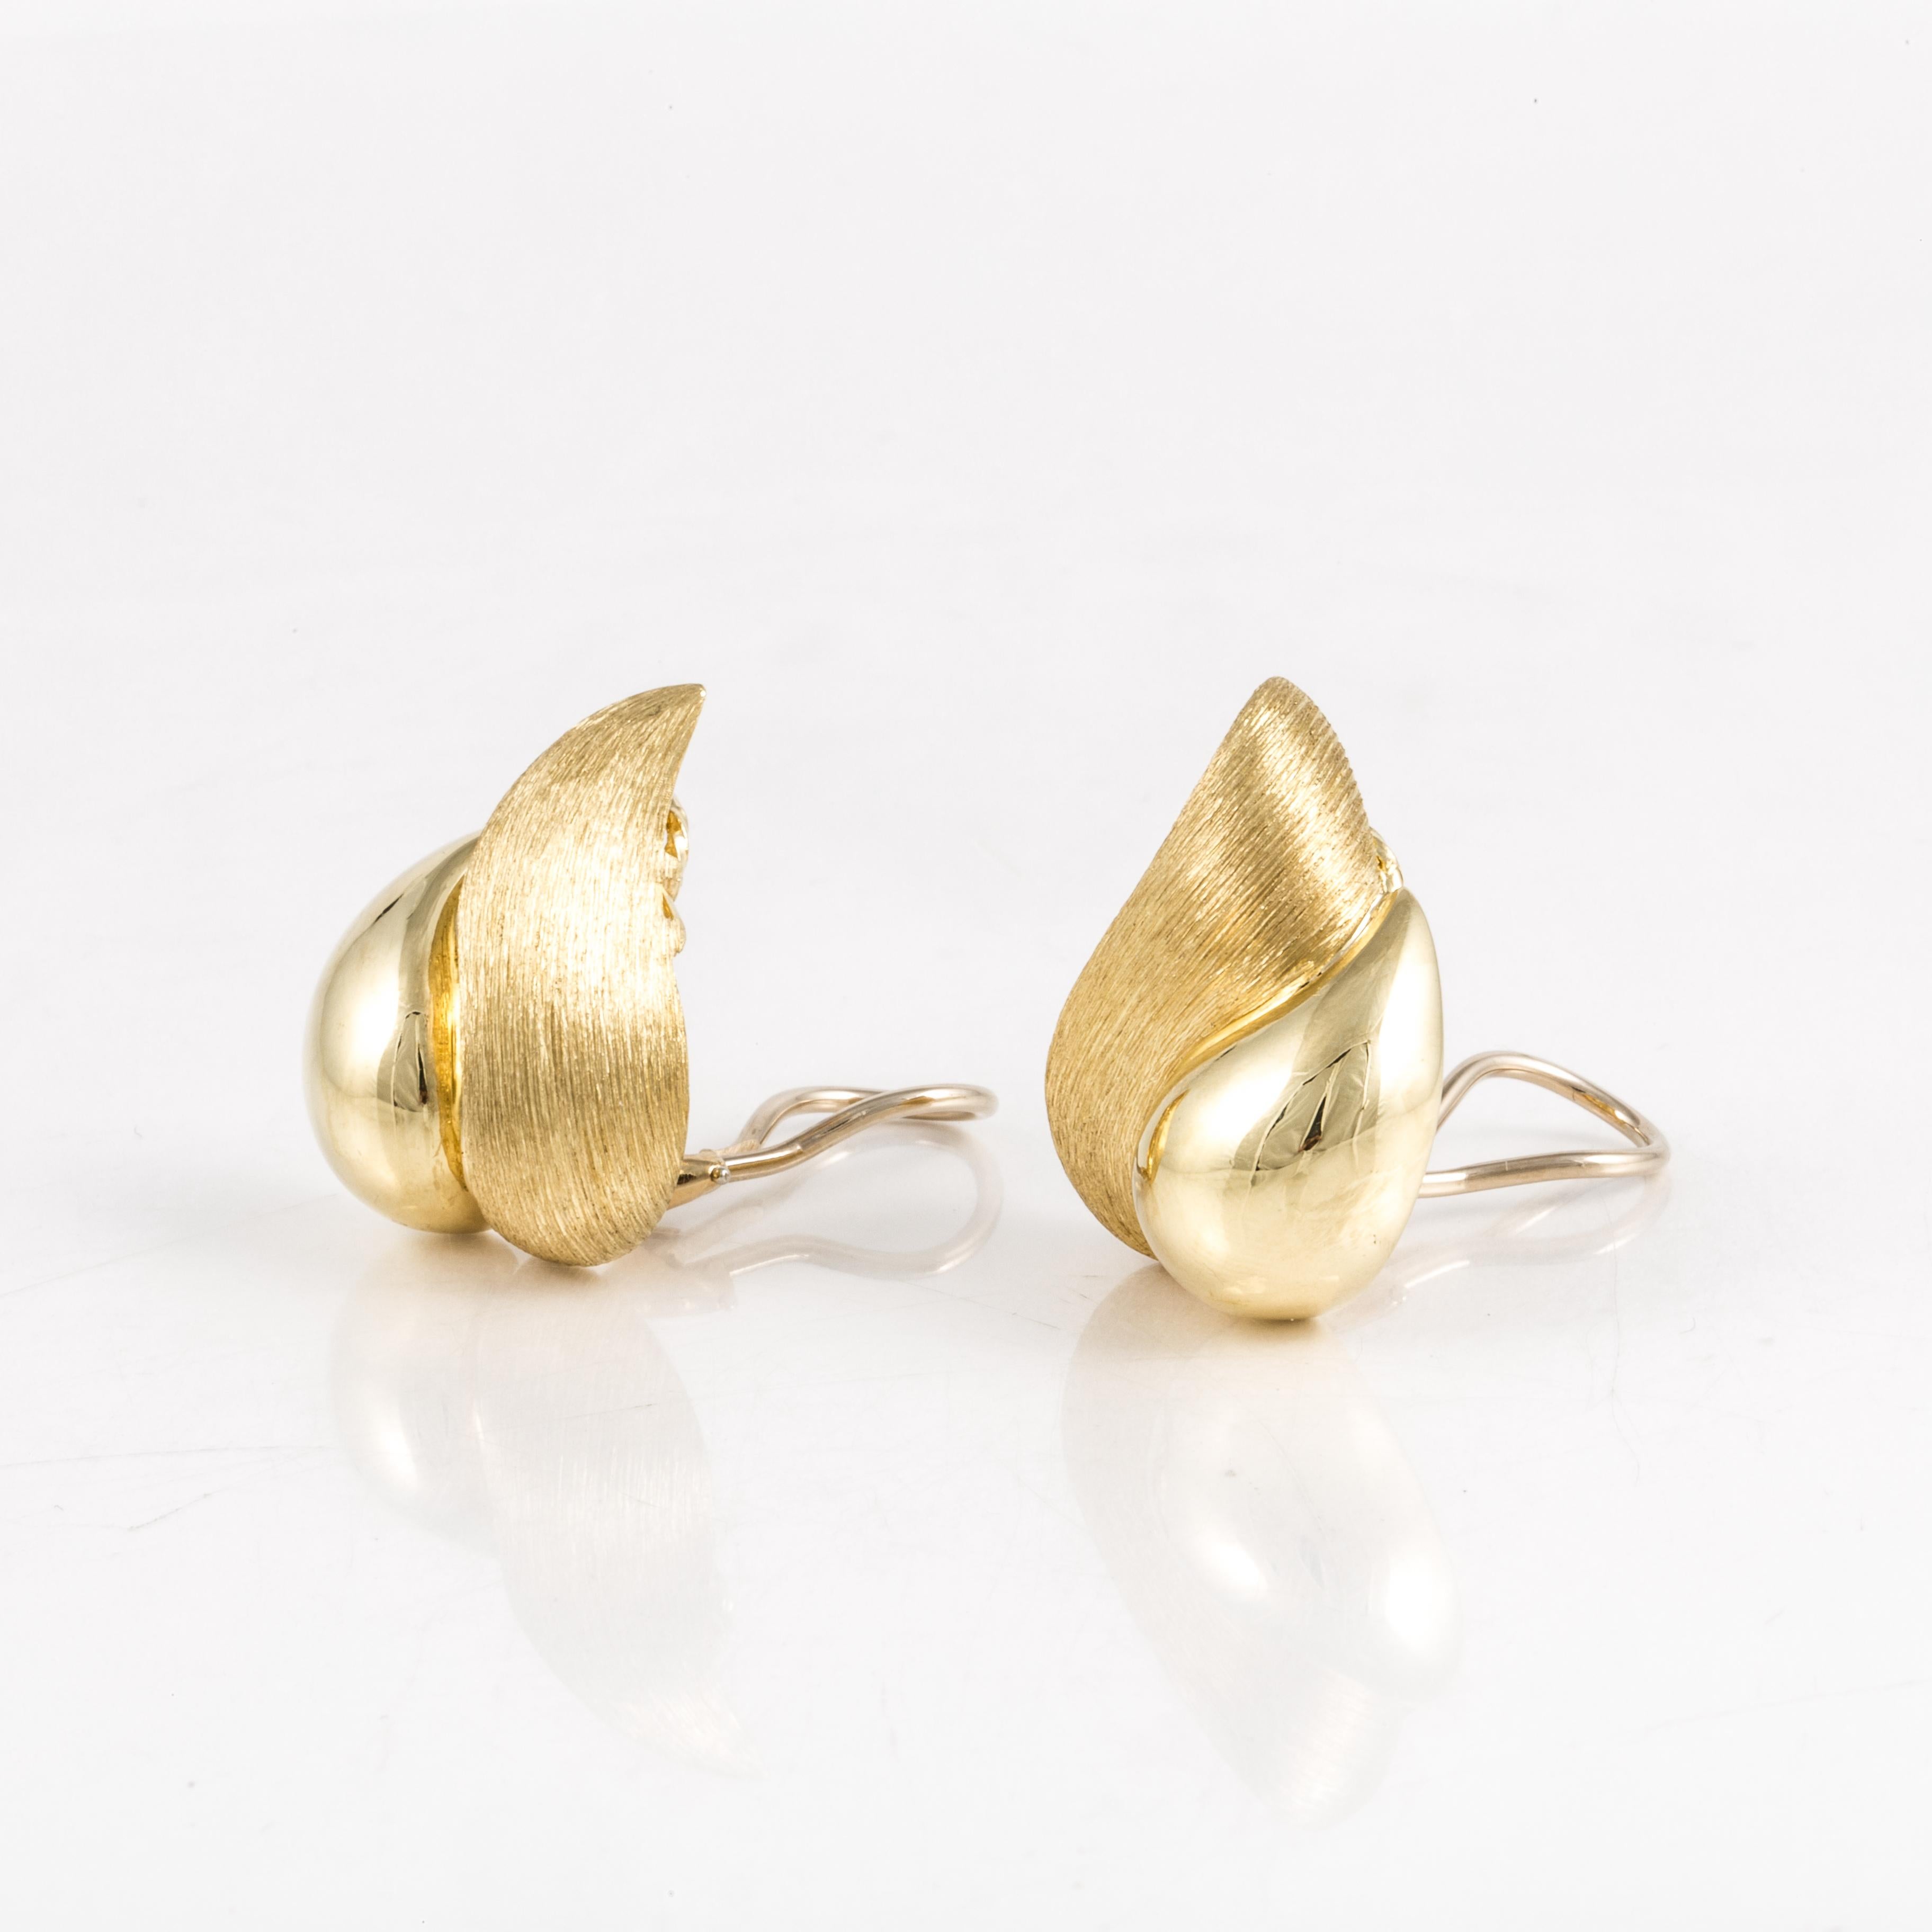 Henry Dunay earrings are 18K yellow gold with both a high polish and Sabi finish.  They are marked 